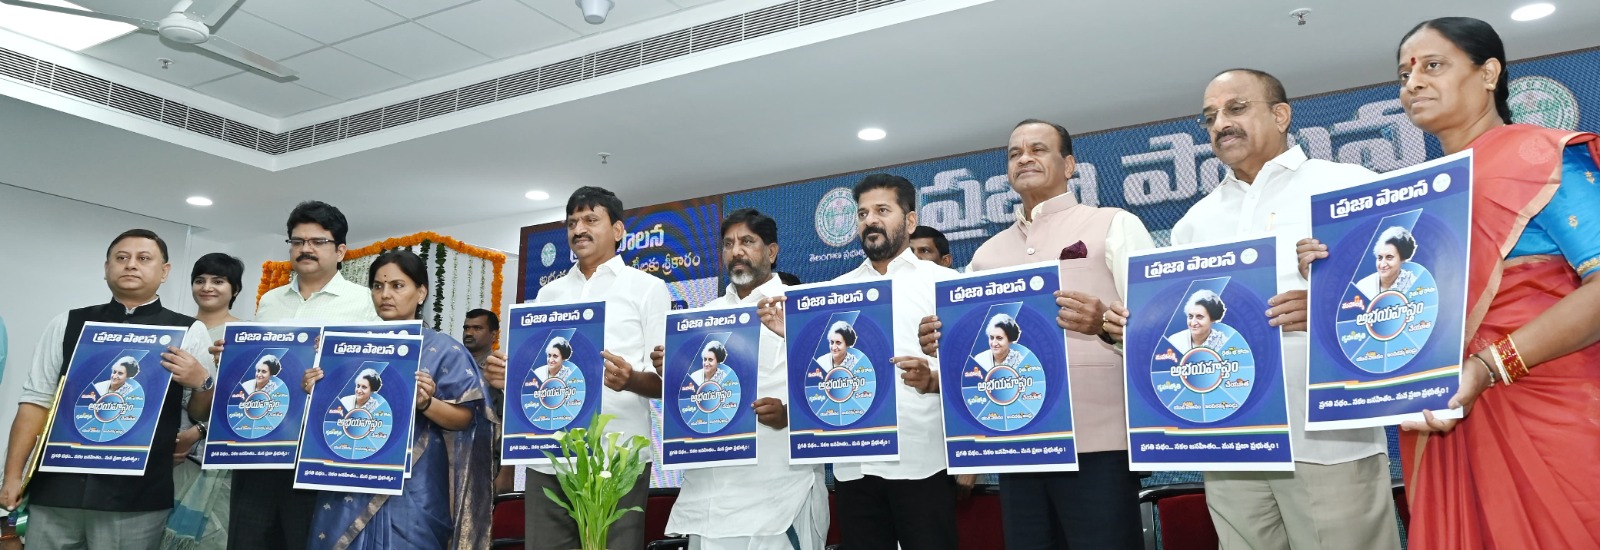 Praja Palani: The Congress-led Telangana government released the logo, poster, and application form for the six guarantees on 27 December. (X)